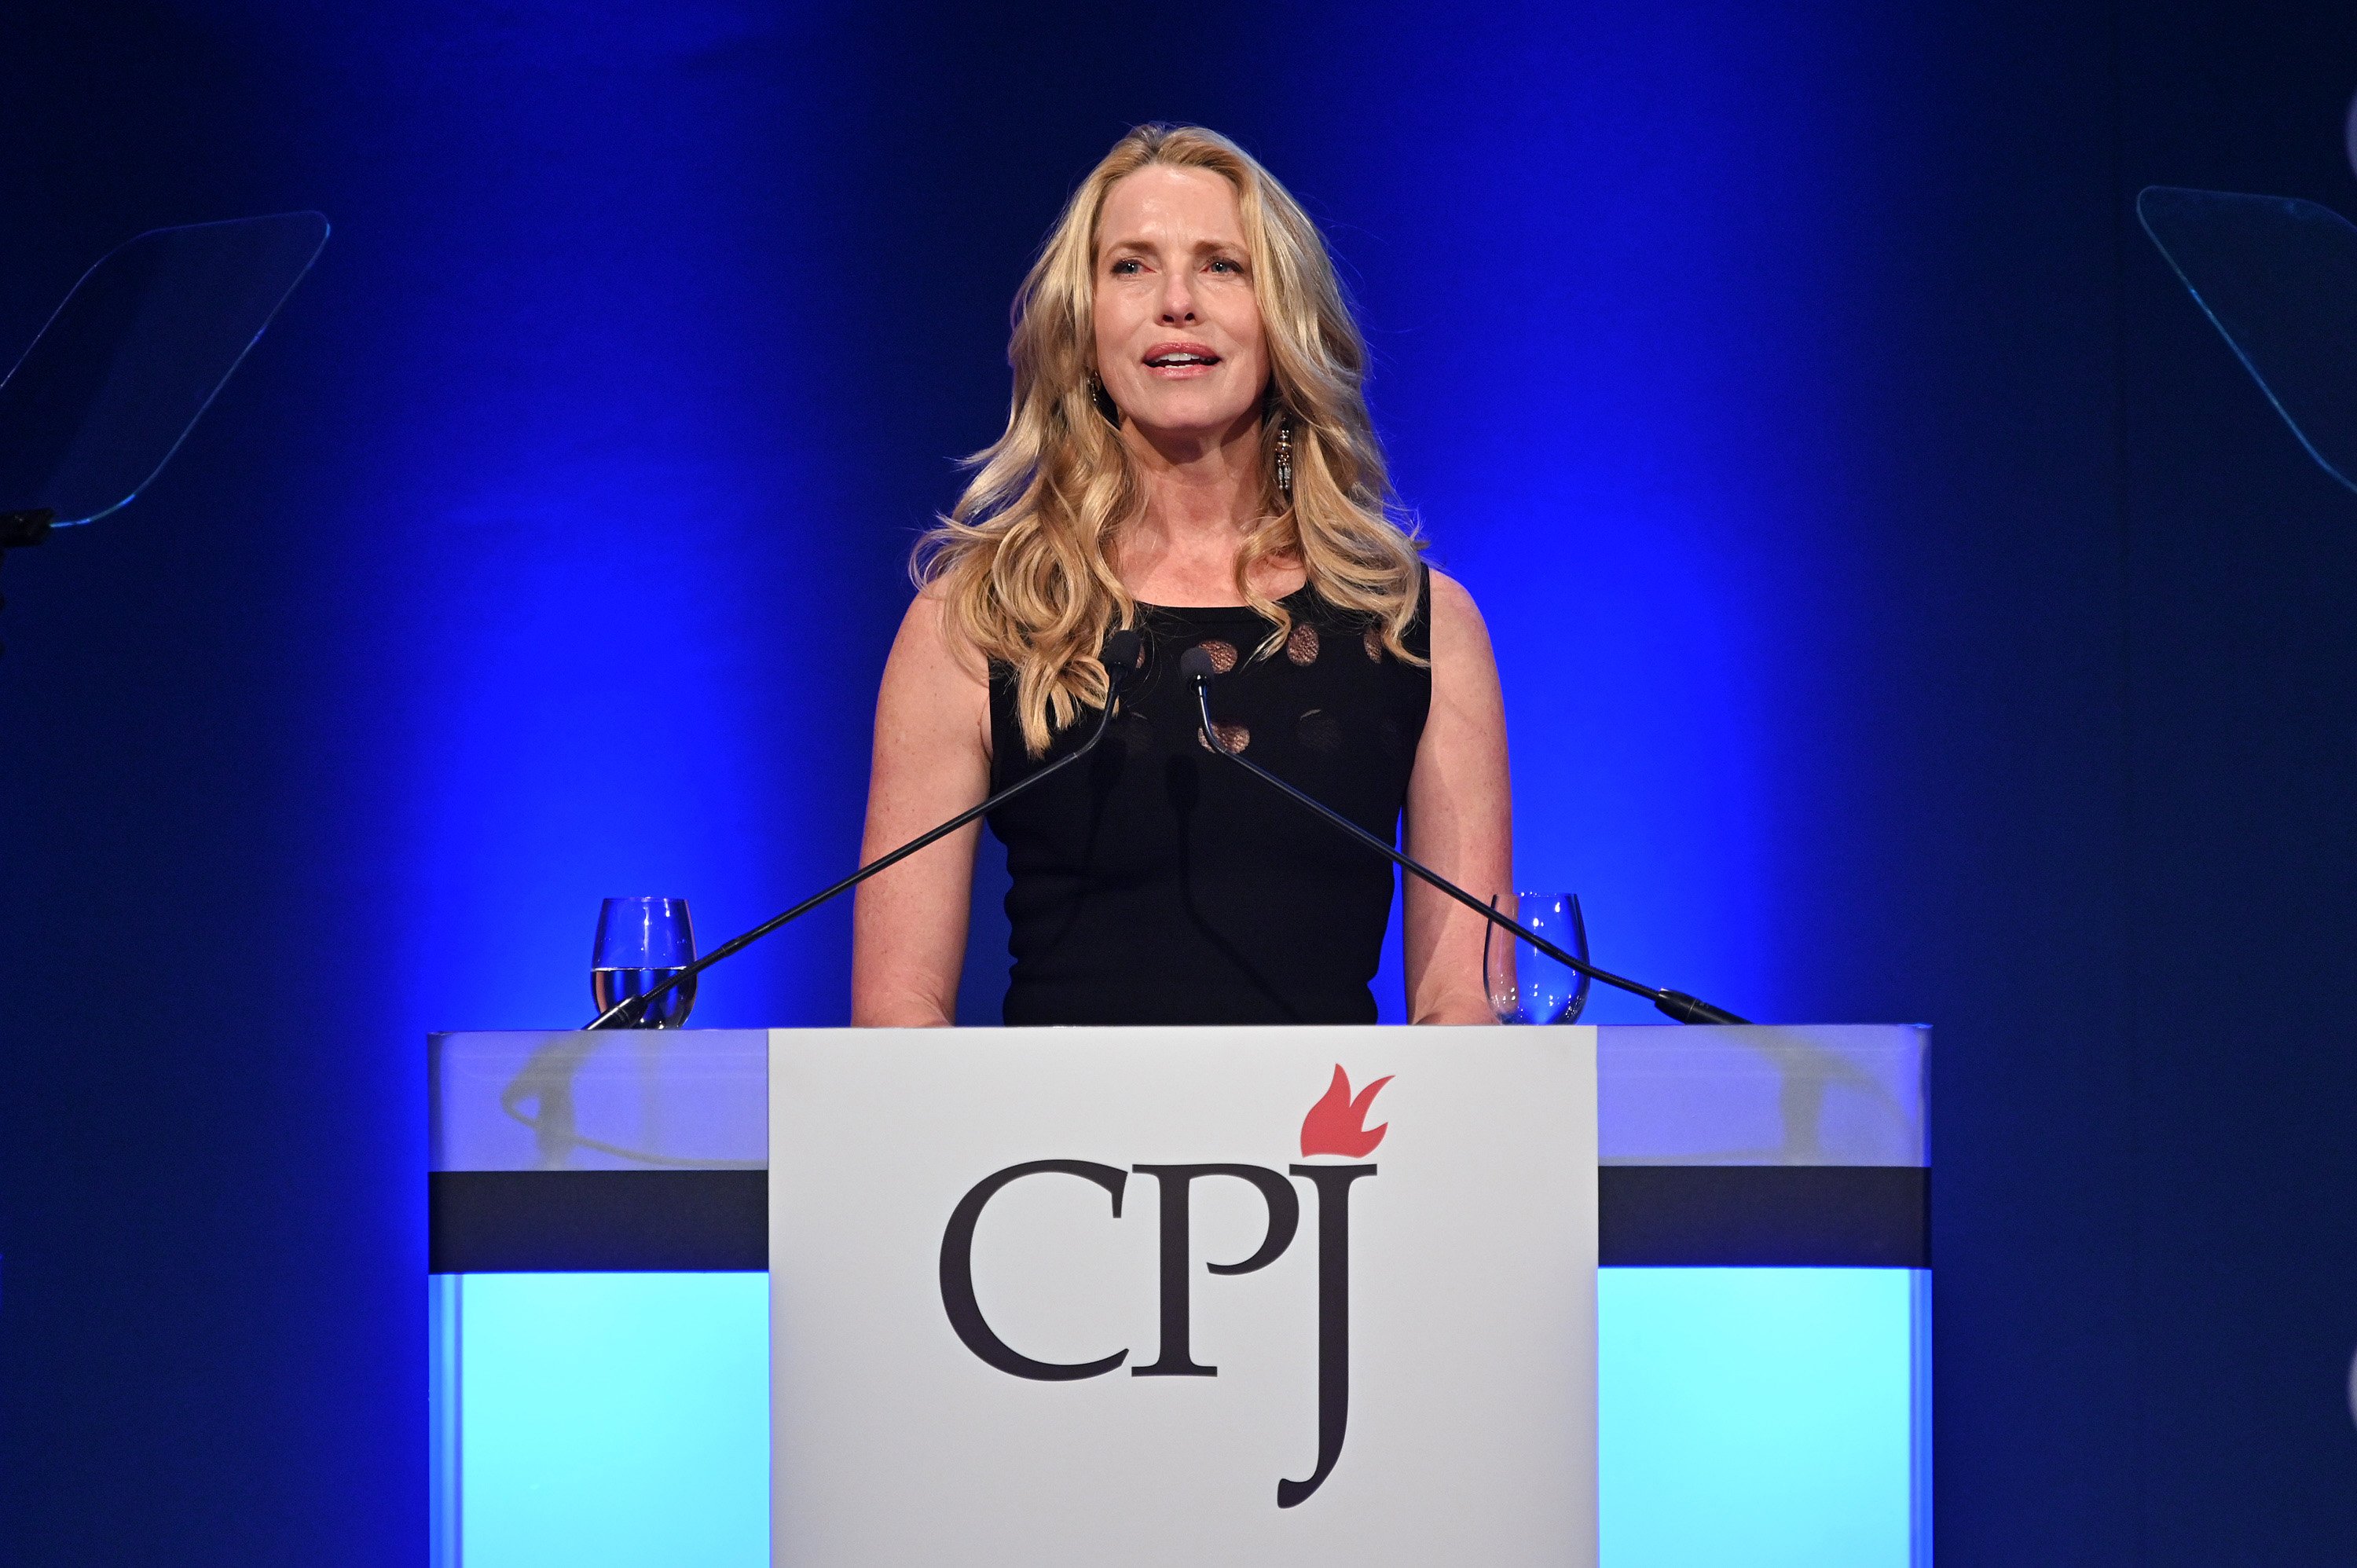 Laurene Powell Jobs at the Committee to Protect Journalists' 29th Annual International Press Freedom Awards on November 21, 2019 | Photo: Getty Images